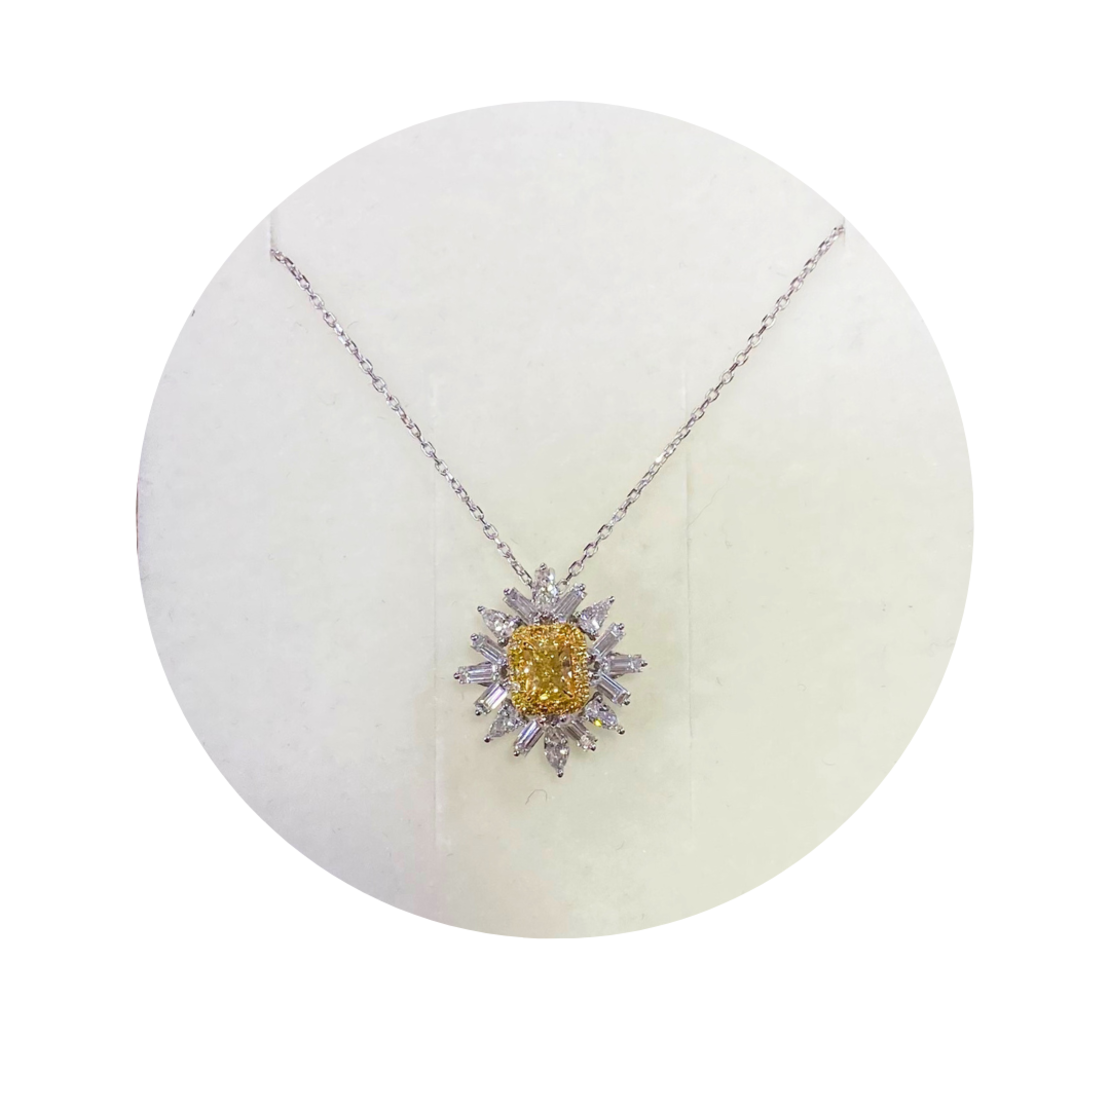 1.17 ct Yellow fancy diamond ring and a necklace